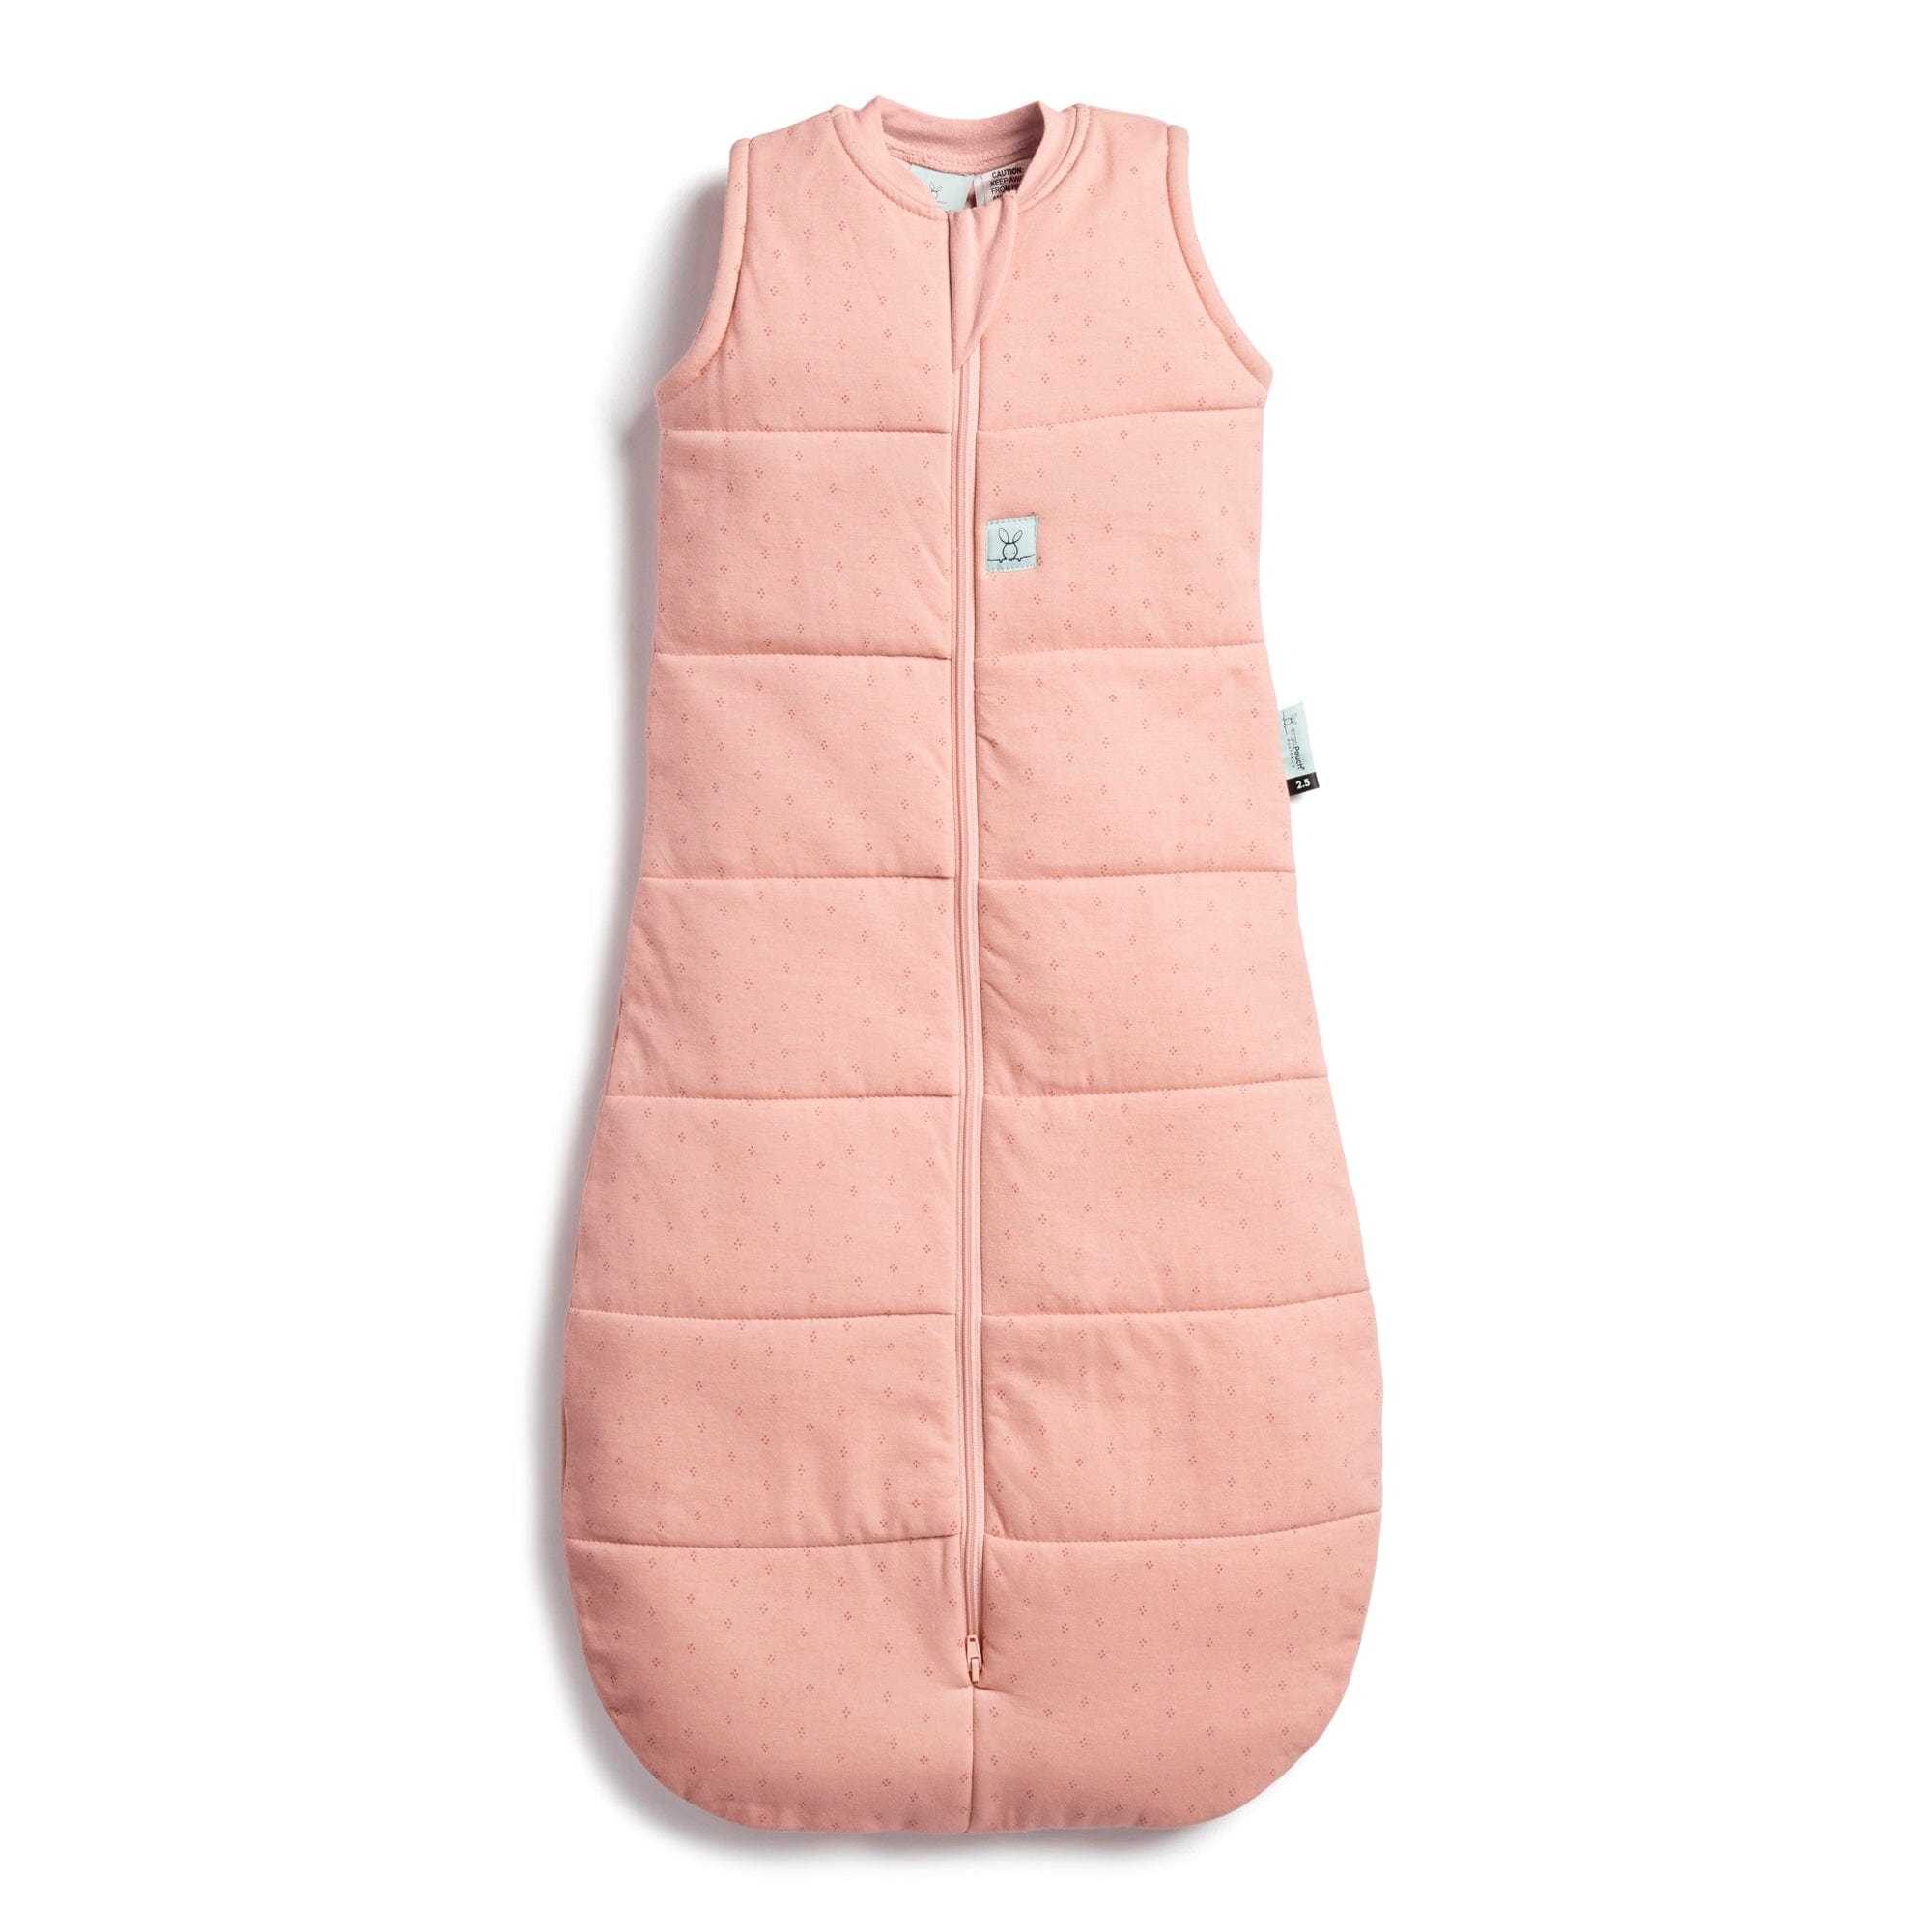 Jersey Sleeping Bag 2.5 Tog For Baby By ergoPouch - Berries